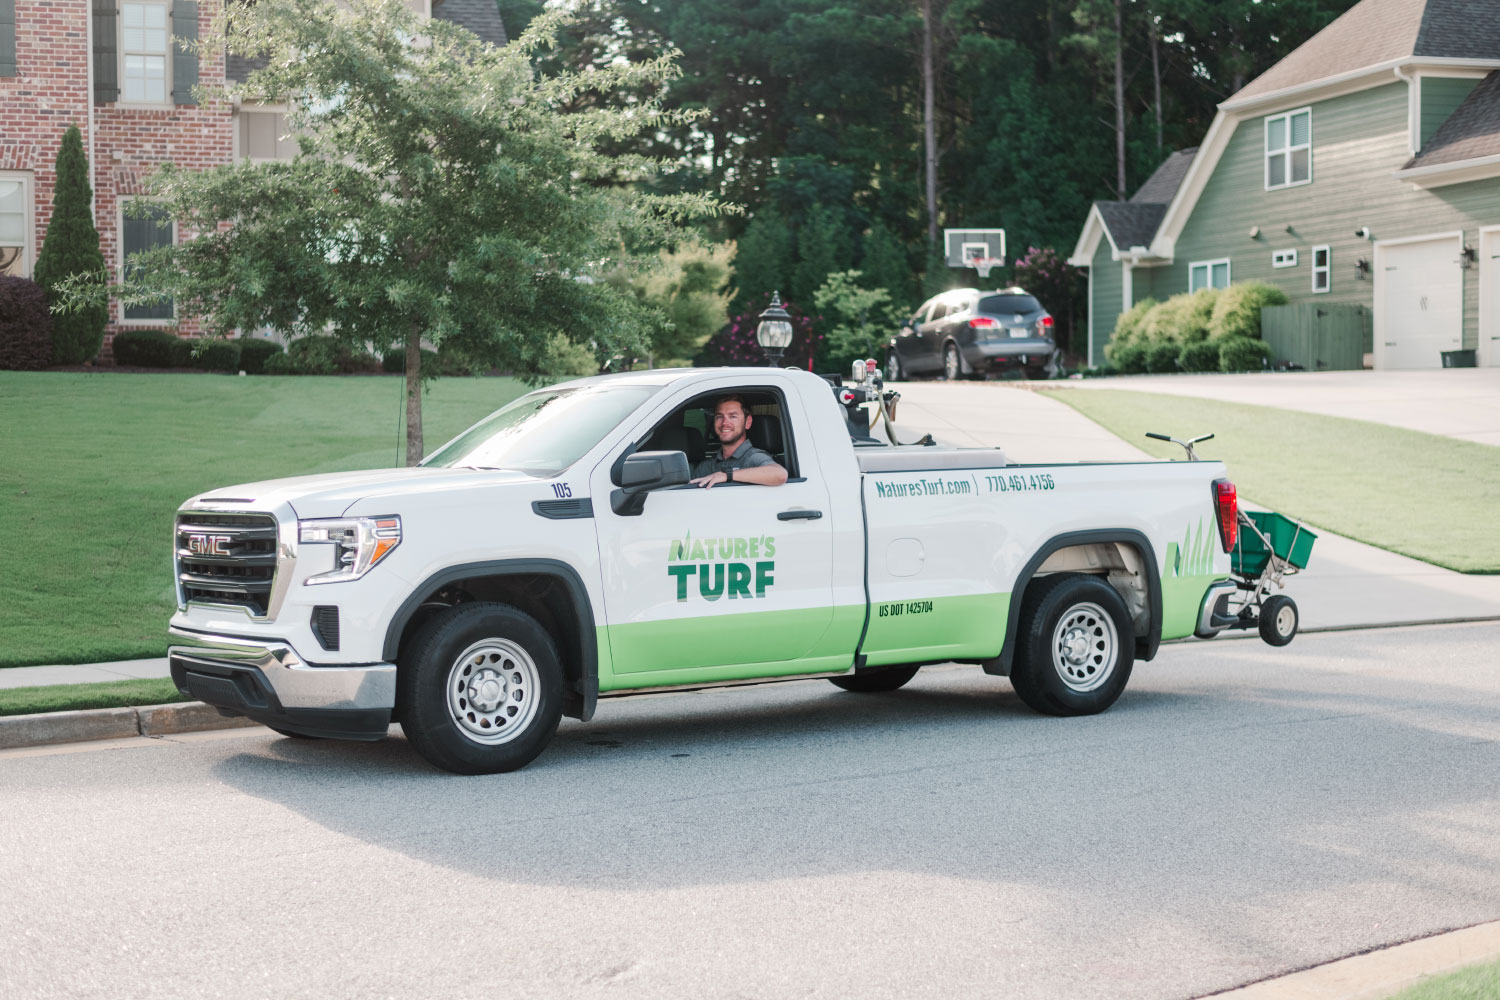 5 Questions to Ask When Hiring a Lawn Care Company (And Why Nature’s Turf Is the Right One)